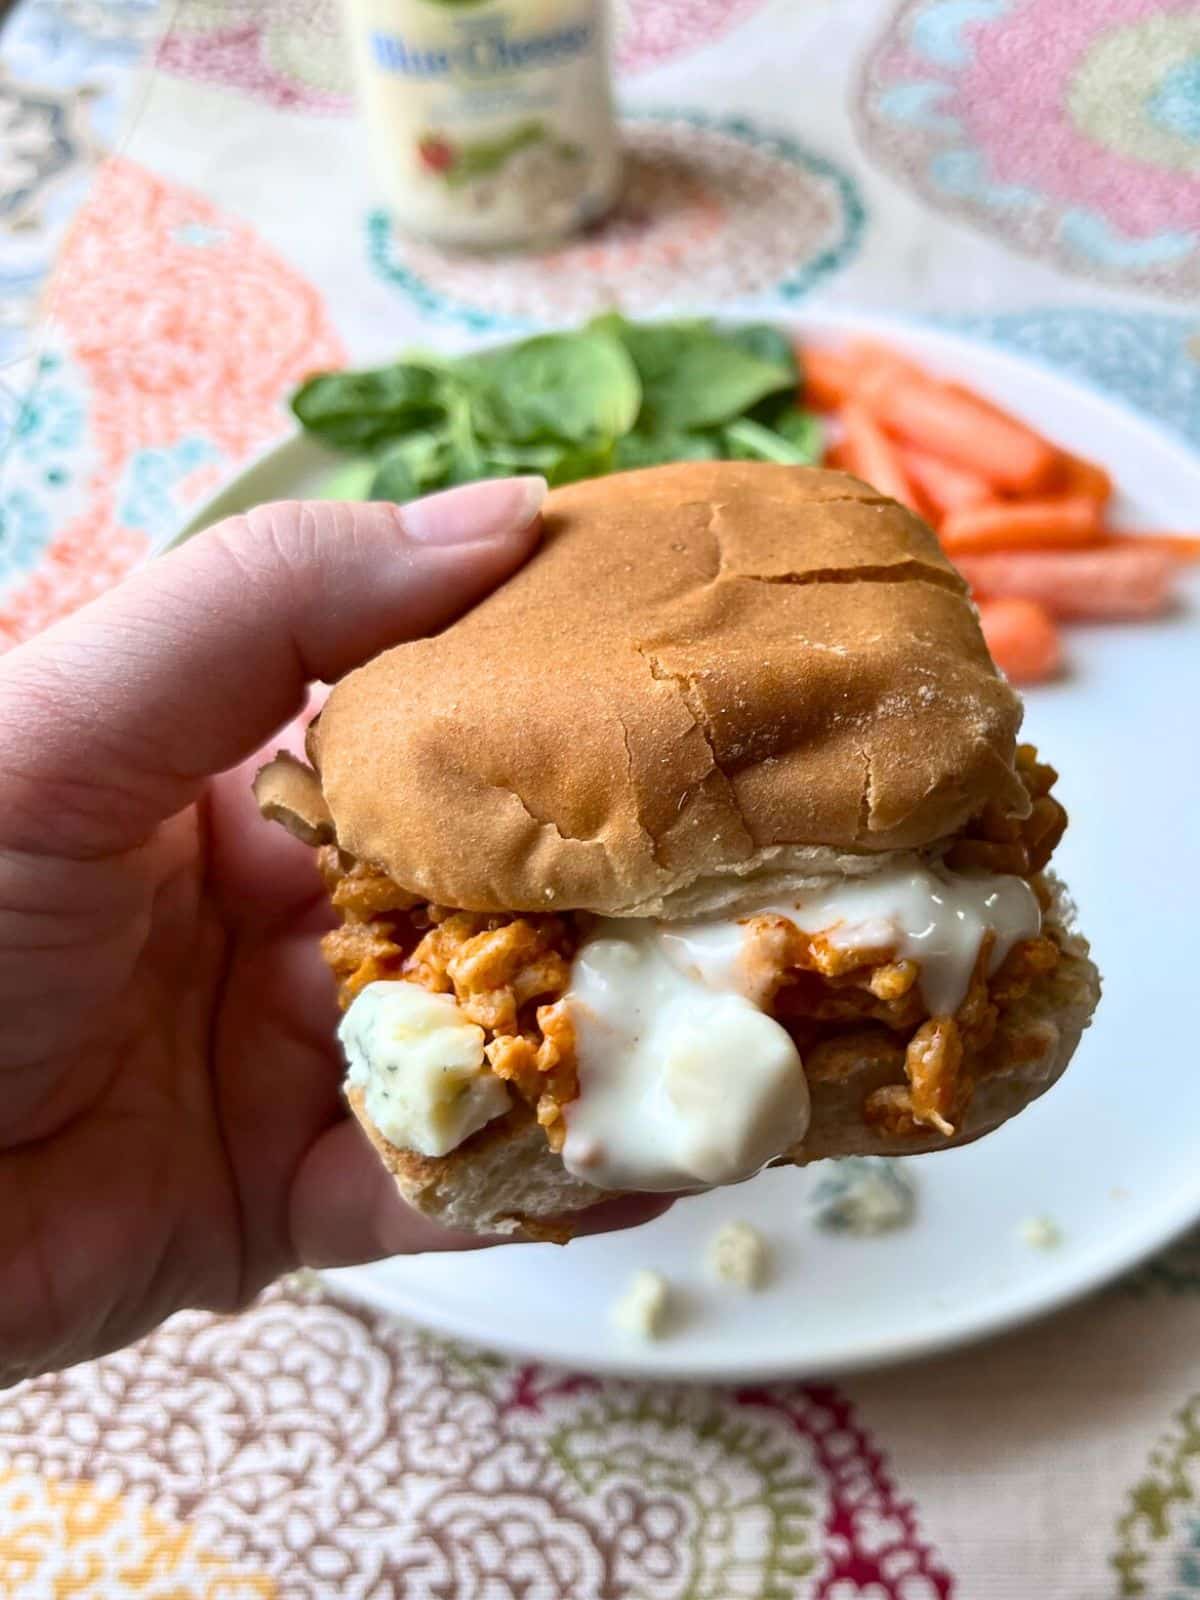 A hand holding a buffalo chicken slider with blue cheese dressing dripping. In the background is a white plate with carrot sticks.